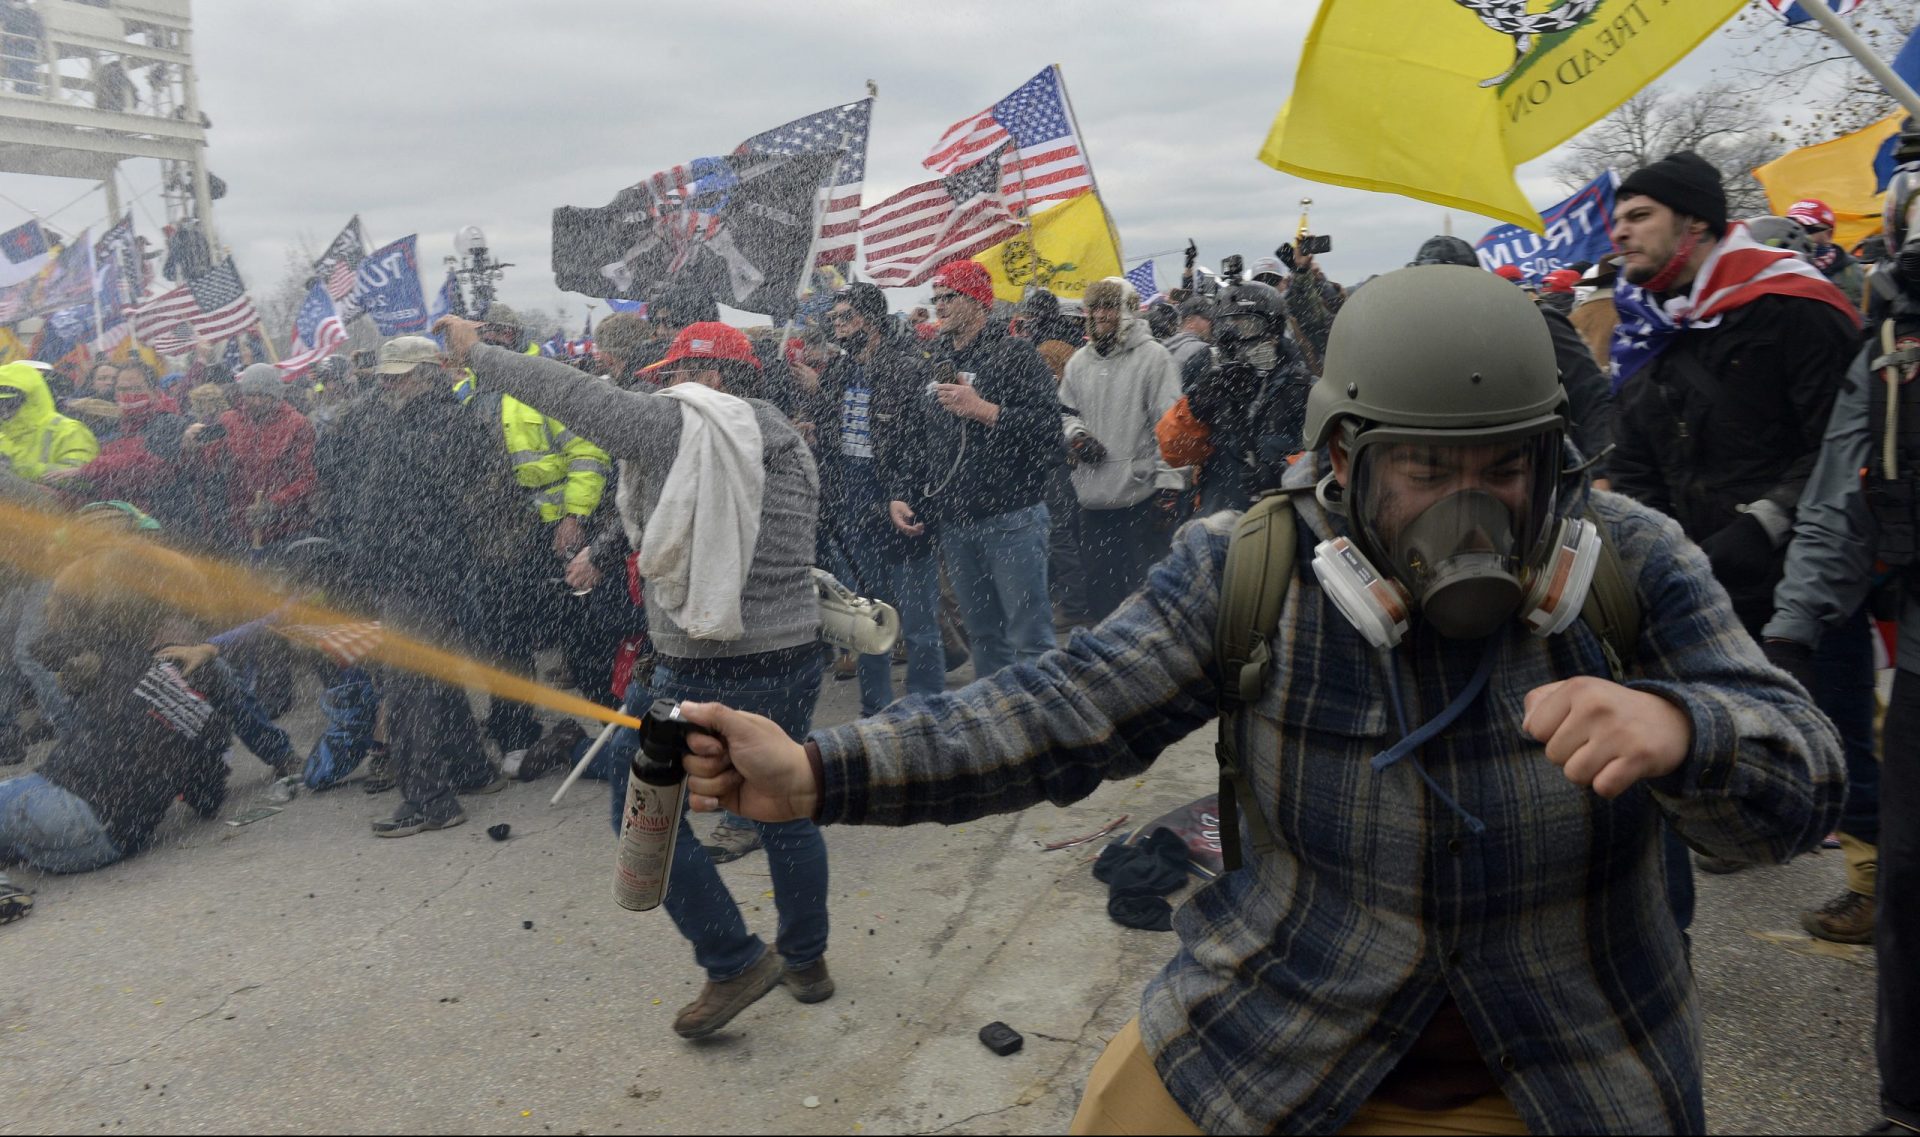 Pro-Trump extremists clashed with police during the storming of the U.S. Capitol on Jan. 6. The rioters may not have fired shots, but many were armed with other weapons, court documents show.